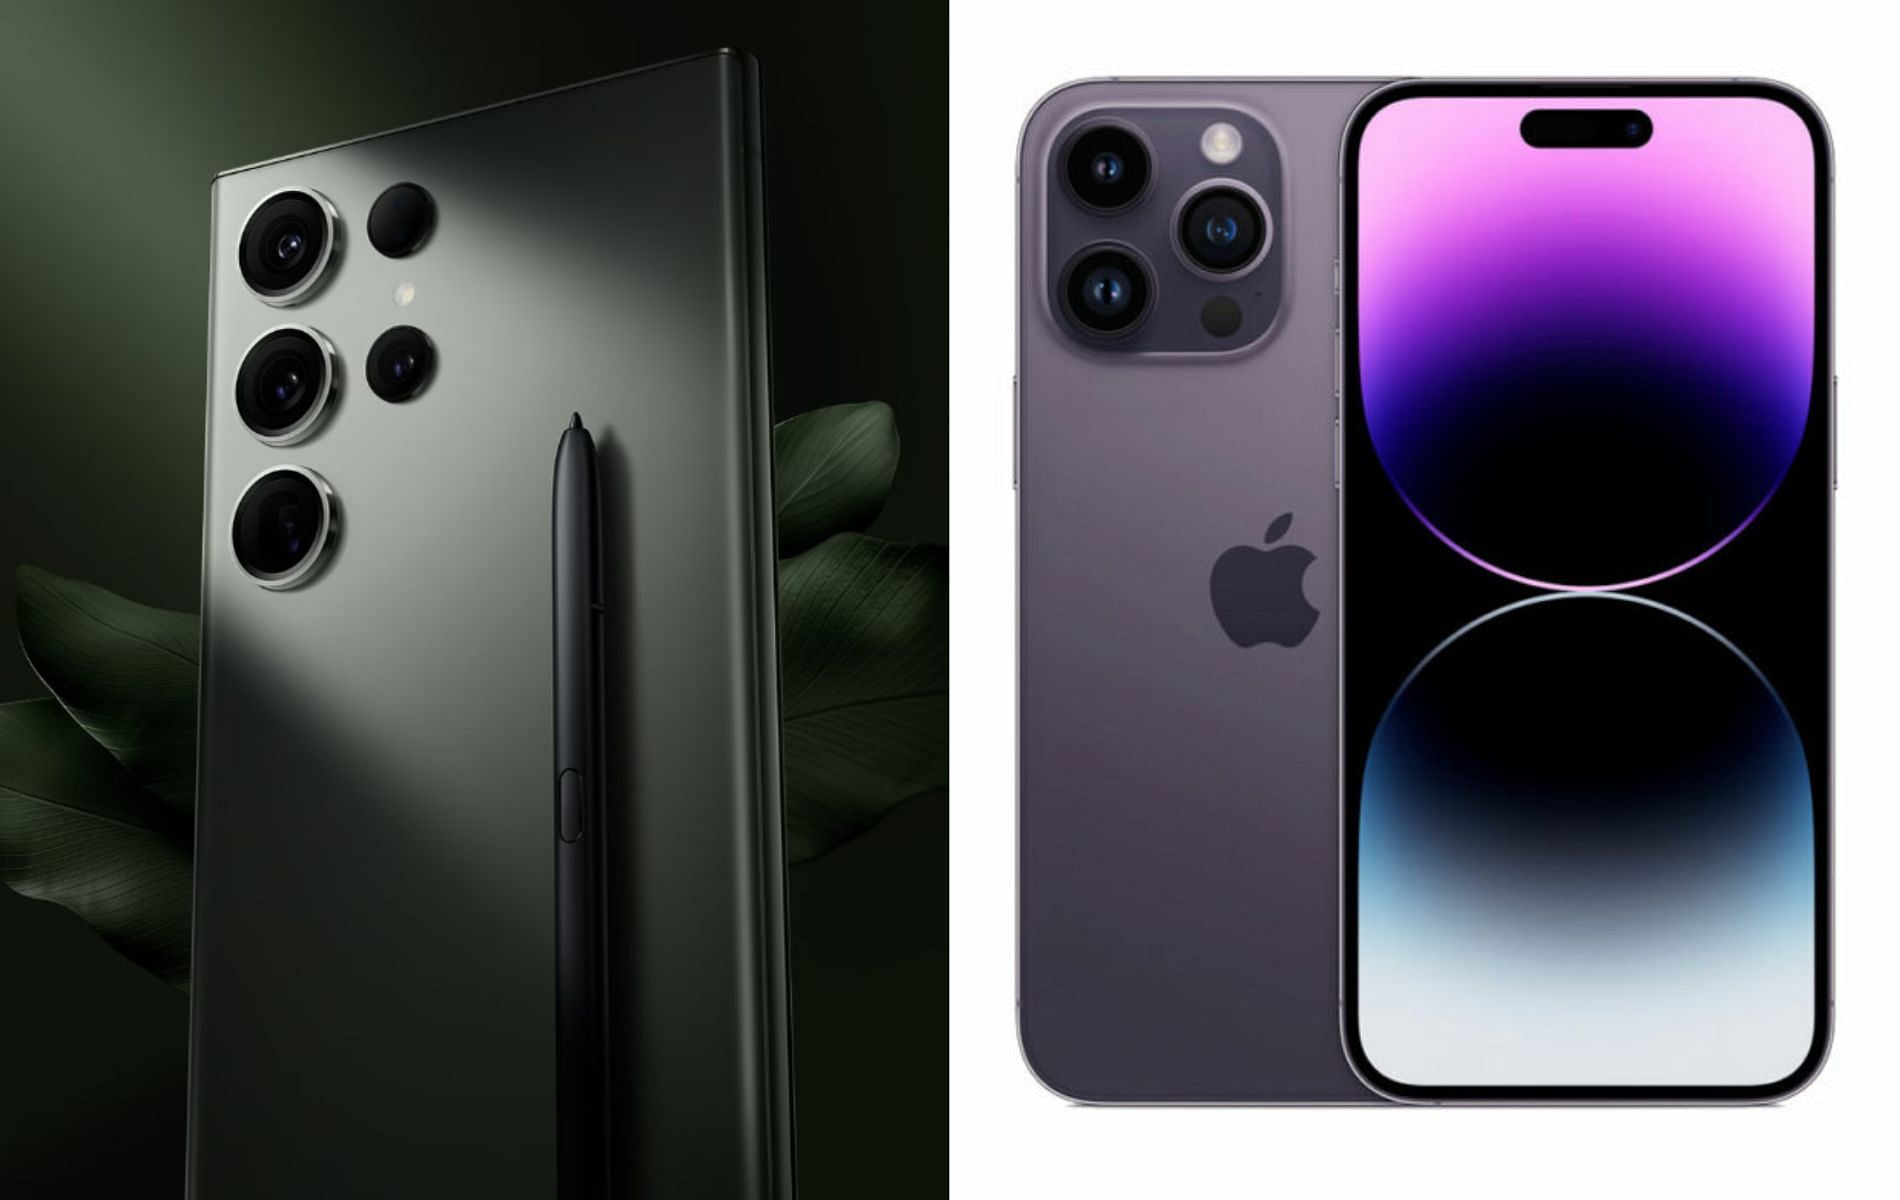 The iPhone 14 Pro Max reflects Apple